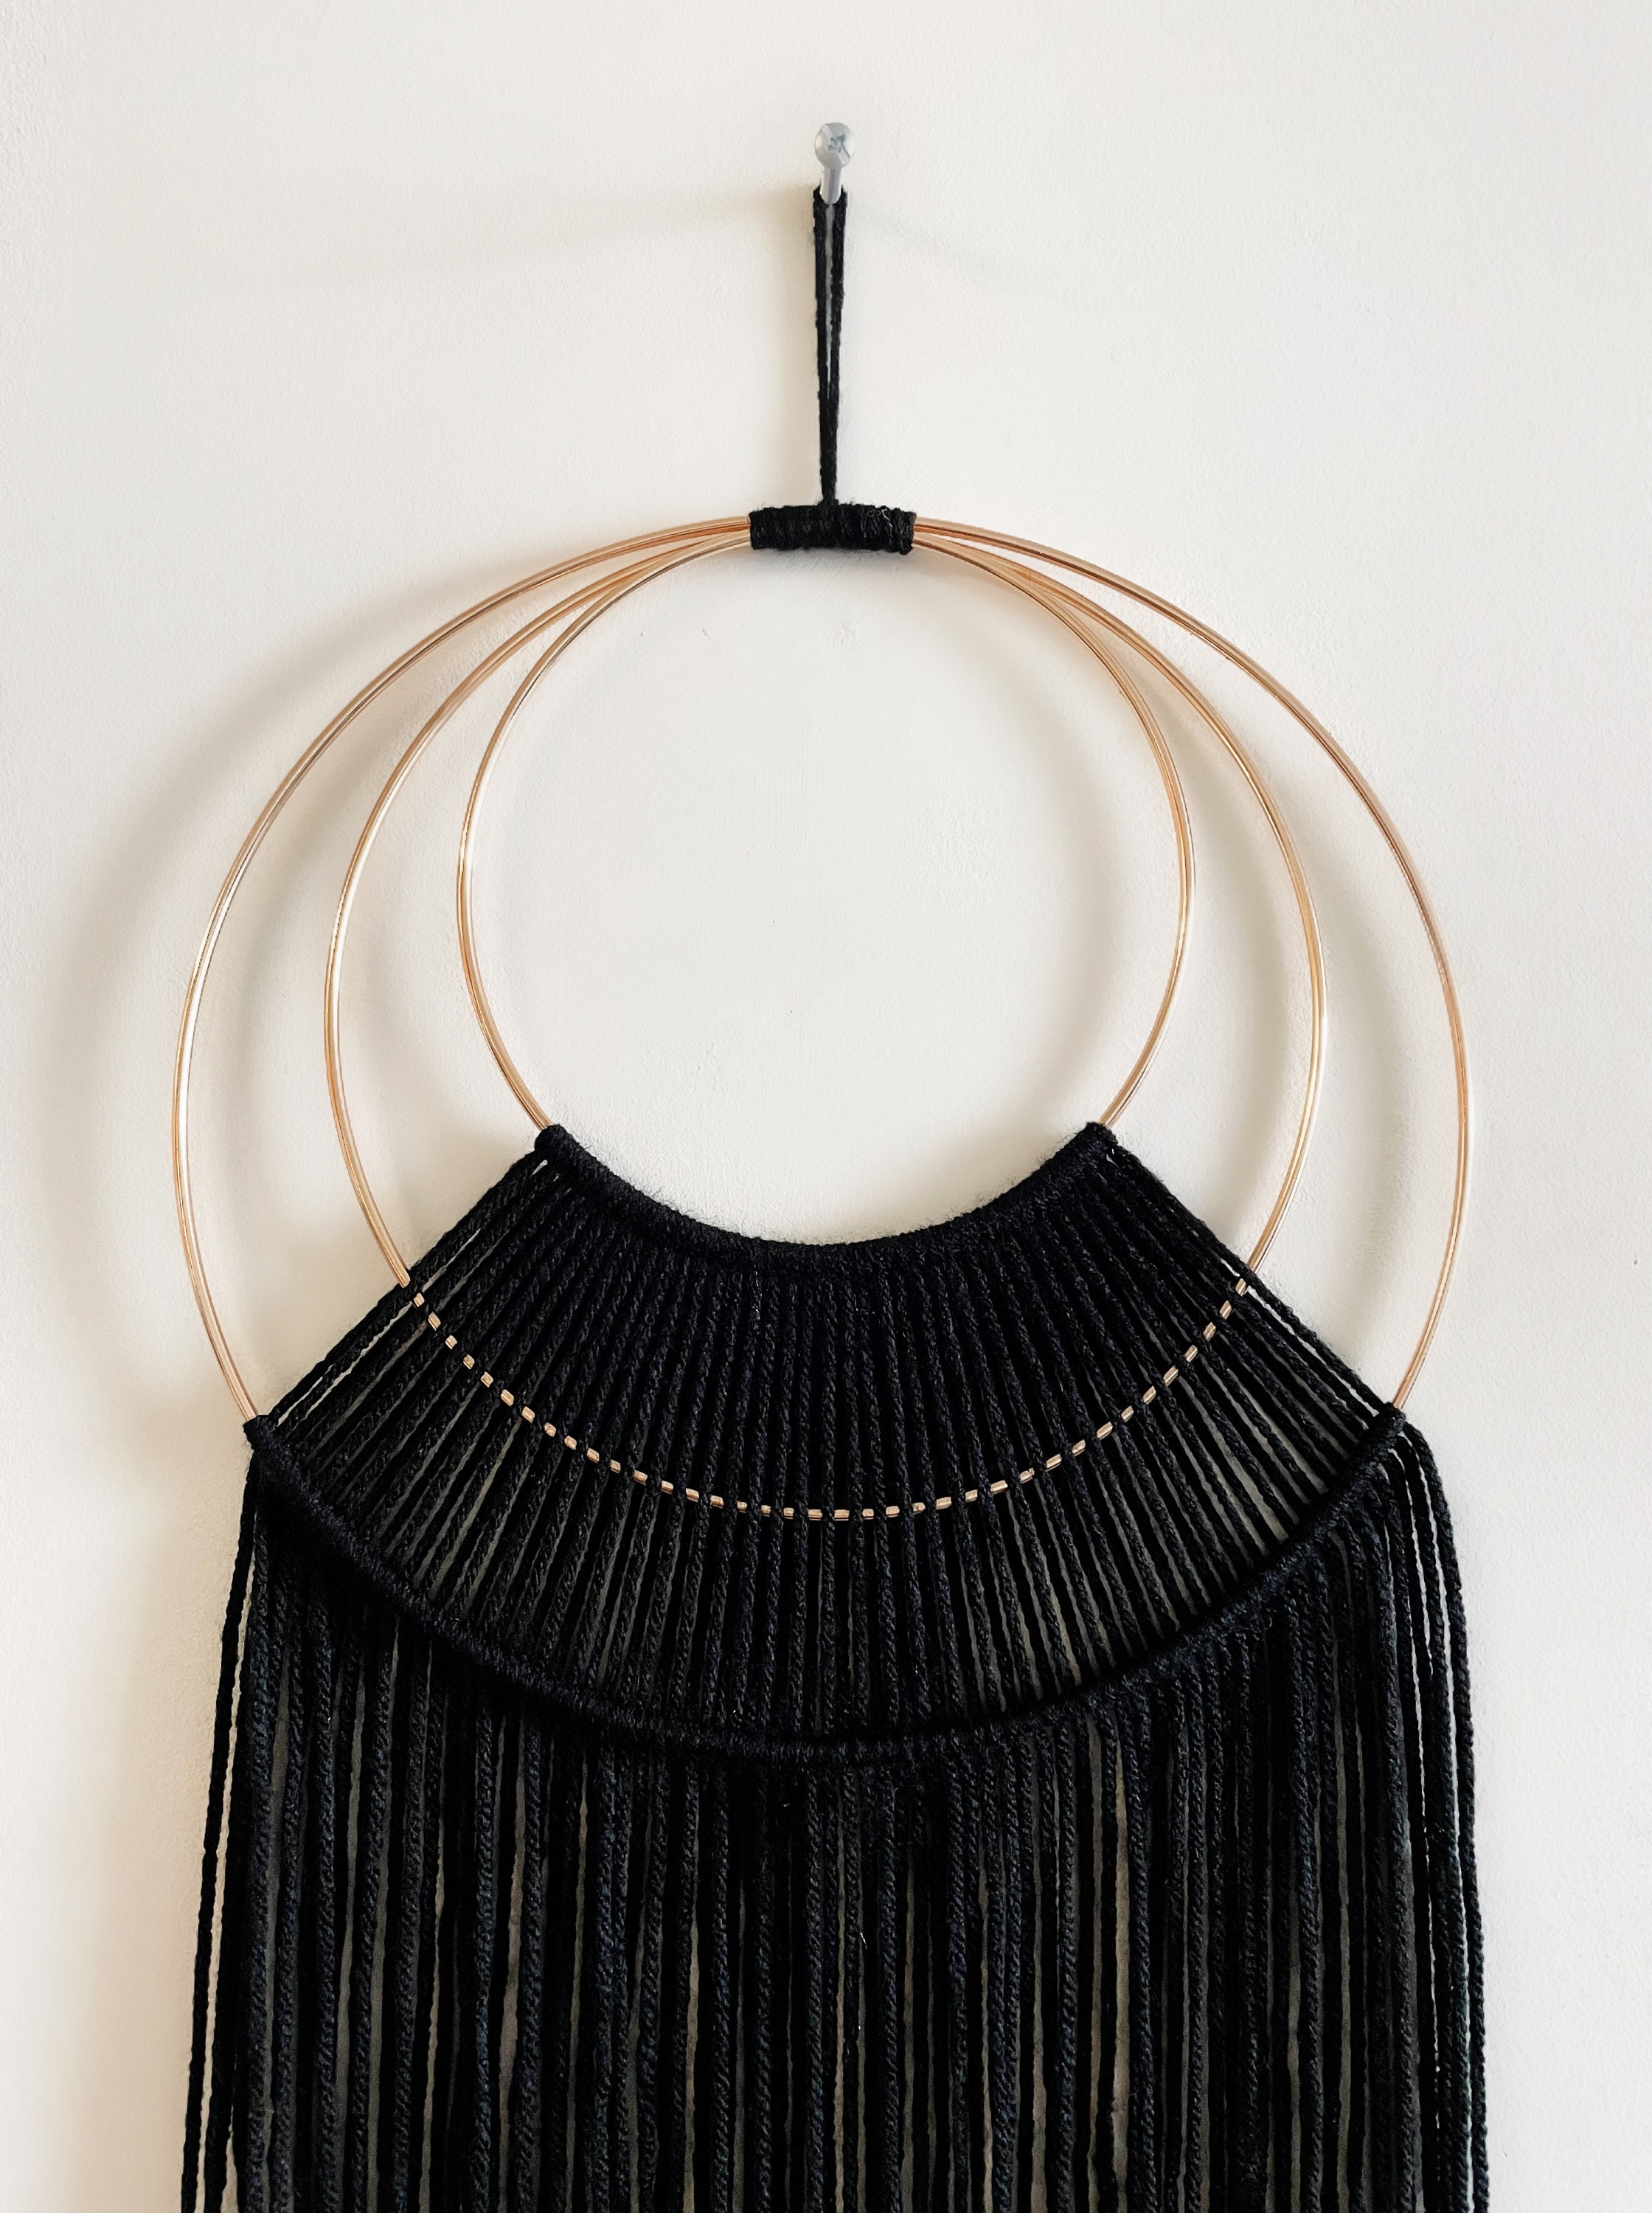 Large Black Macrame Wall Hanging, Wood Bead Accents, Necklace